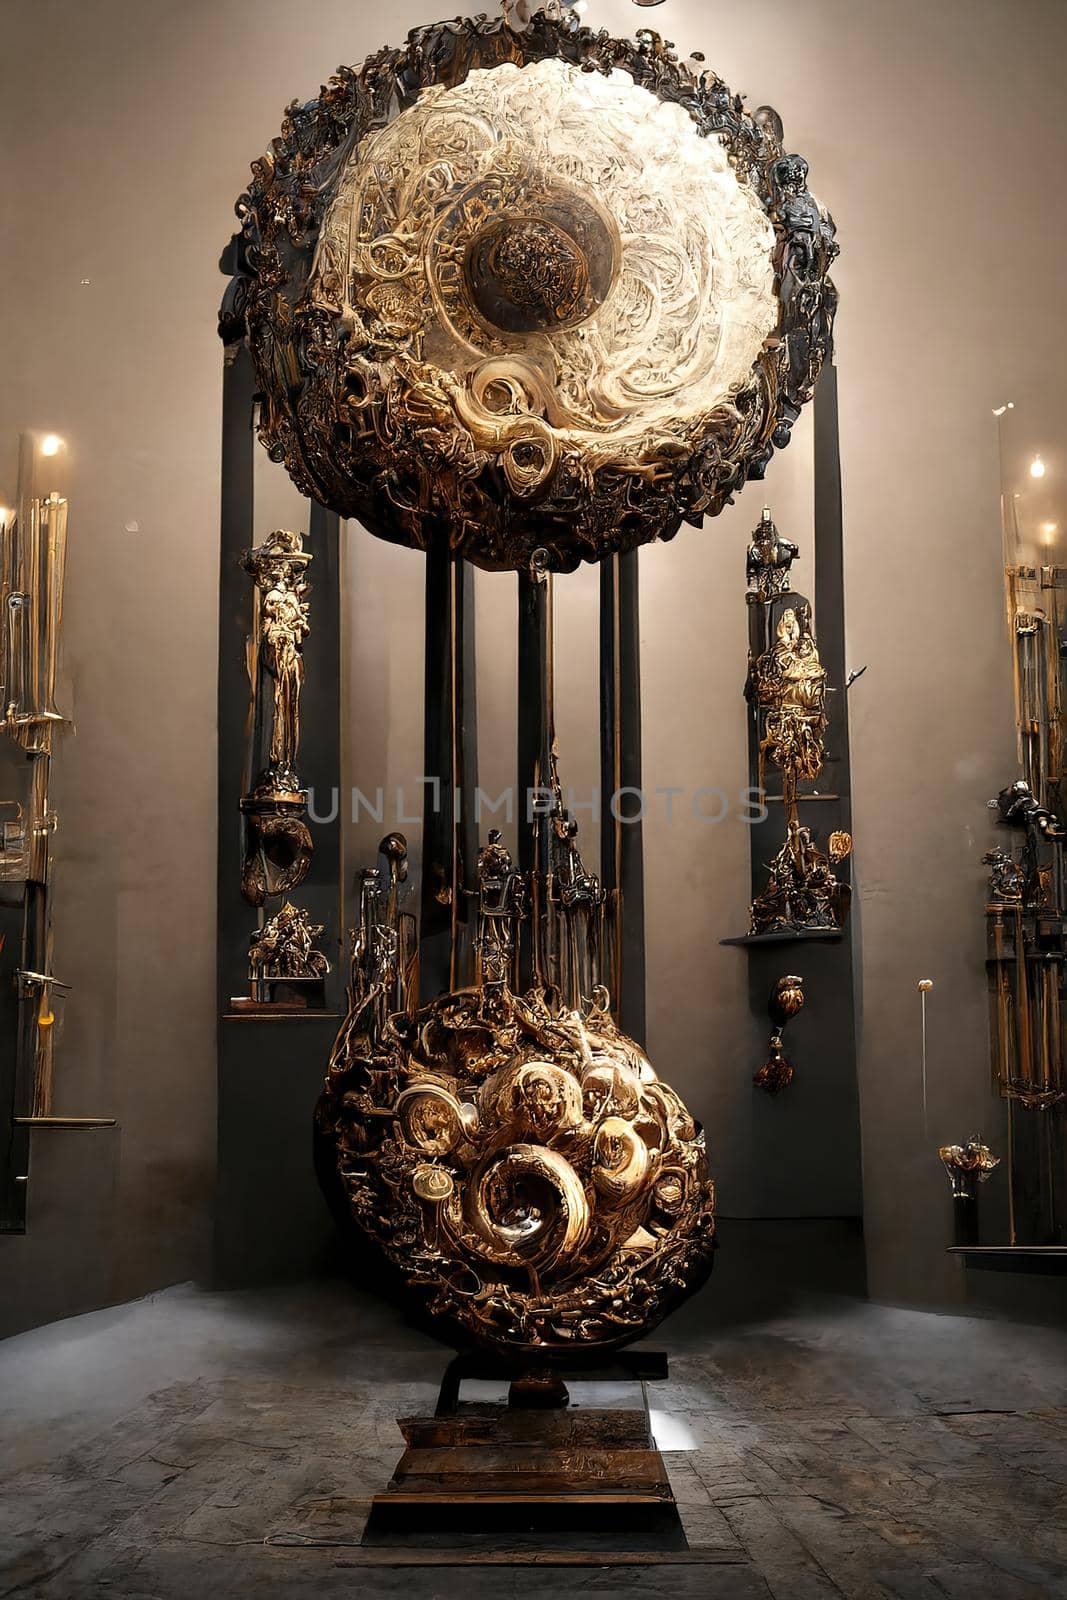 Baroque sculpture of gong, intricate details, 3d render by Farcas